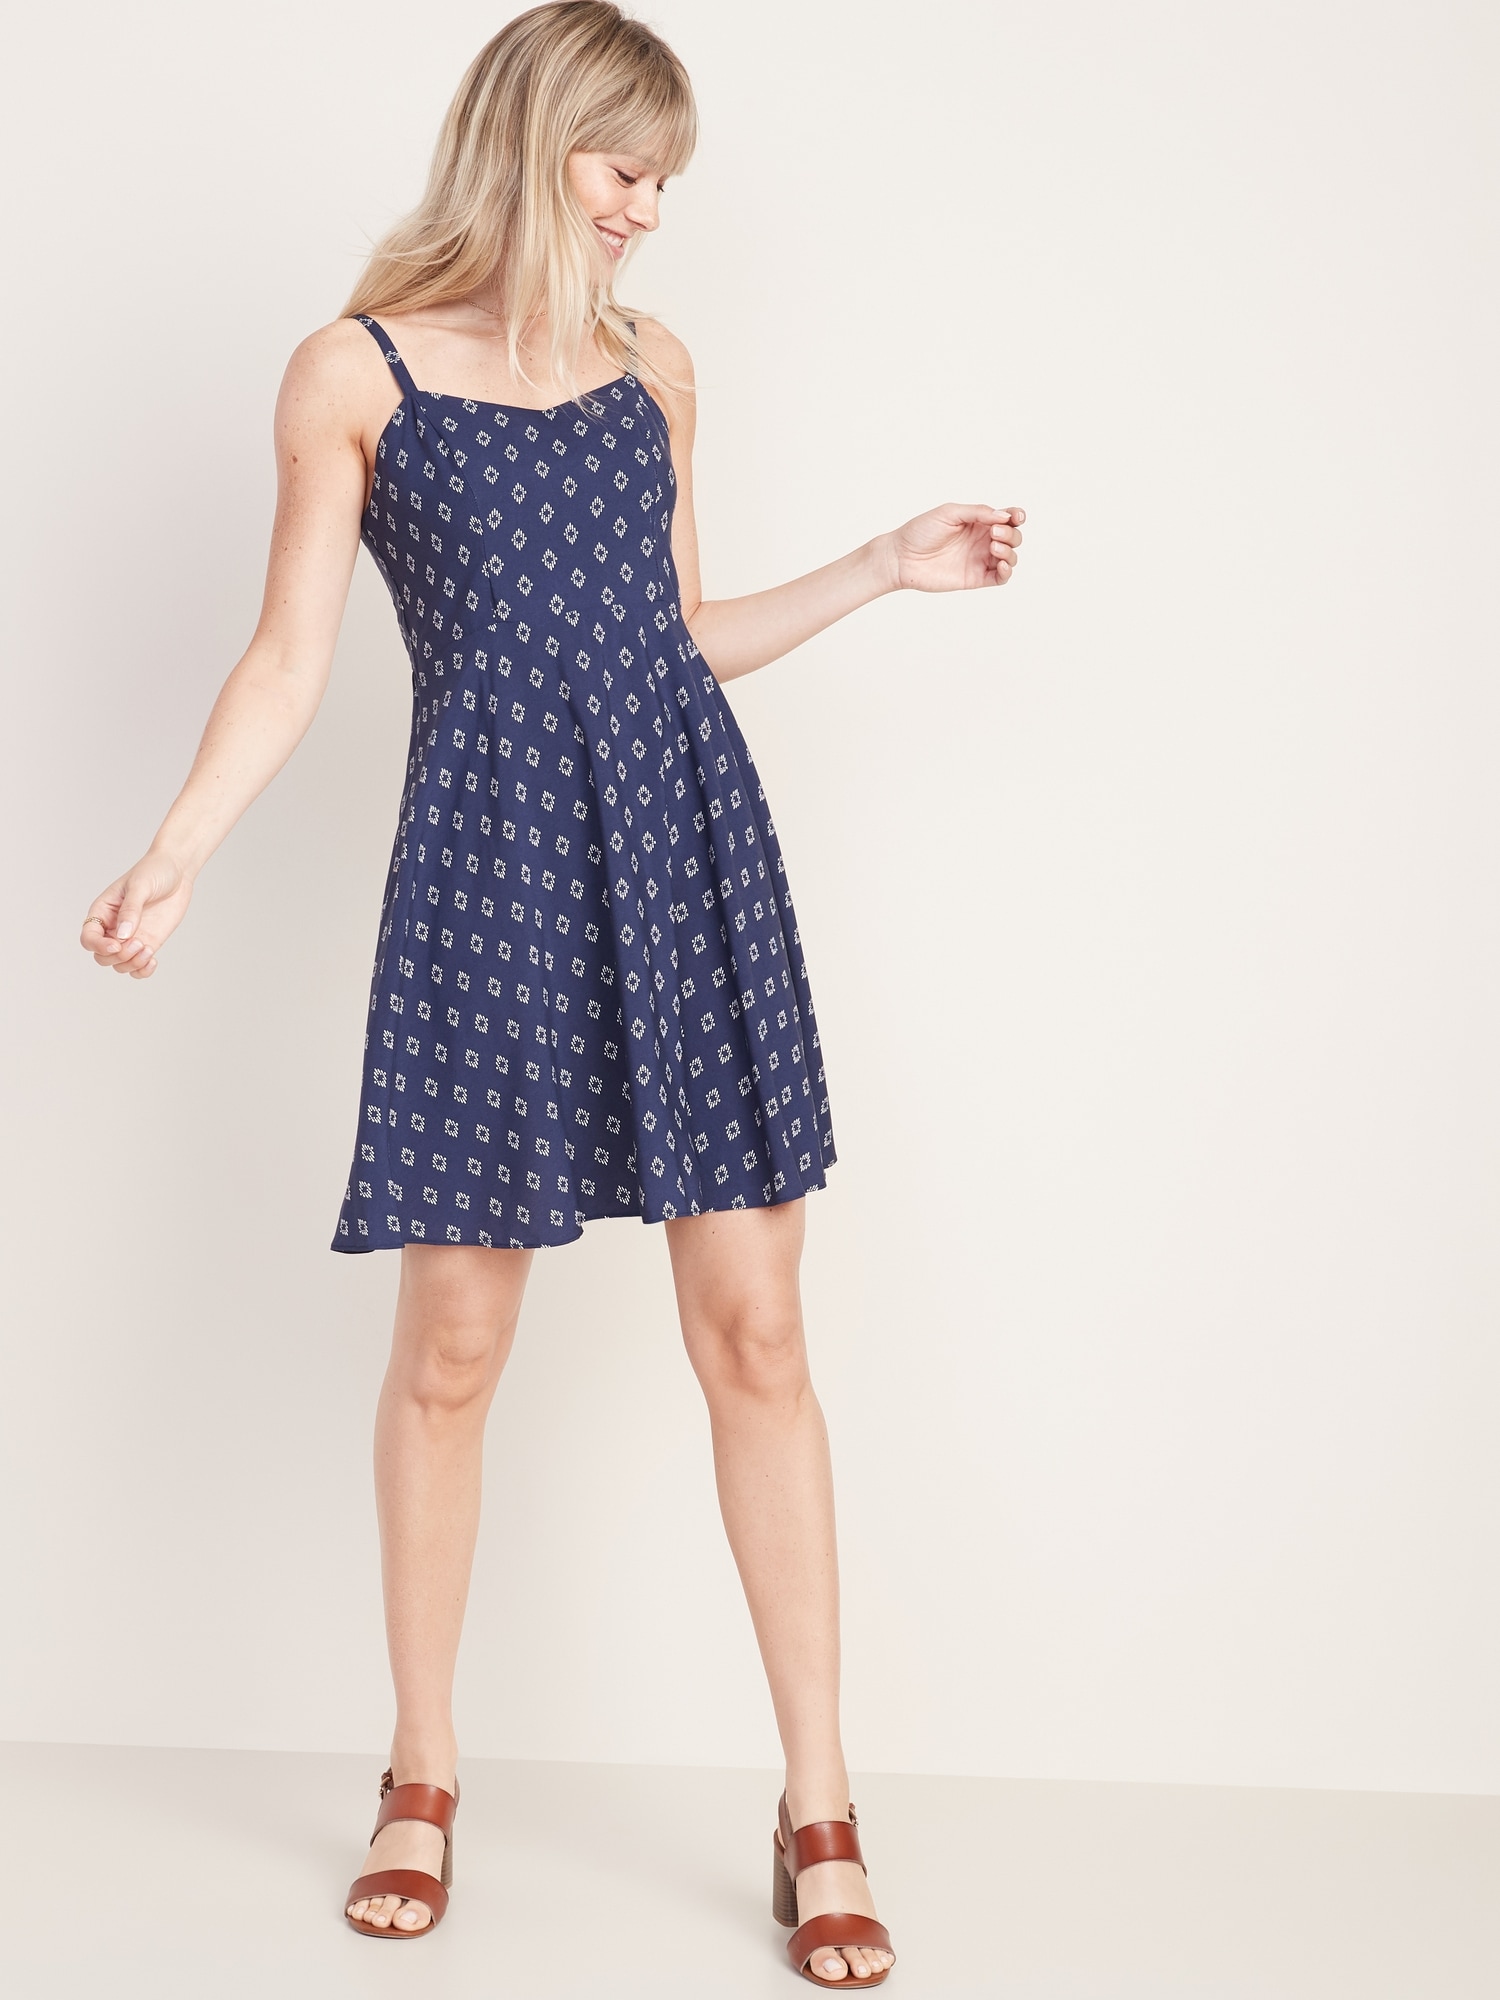 navy fit and flare dress